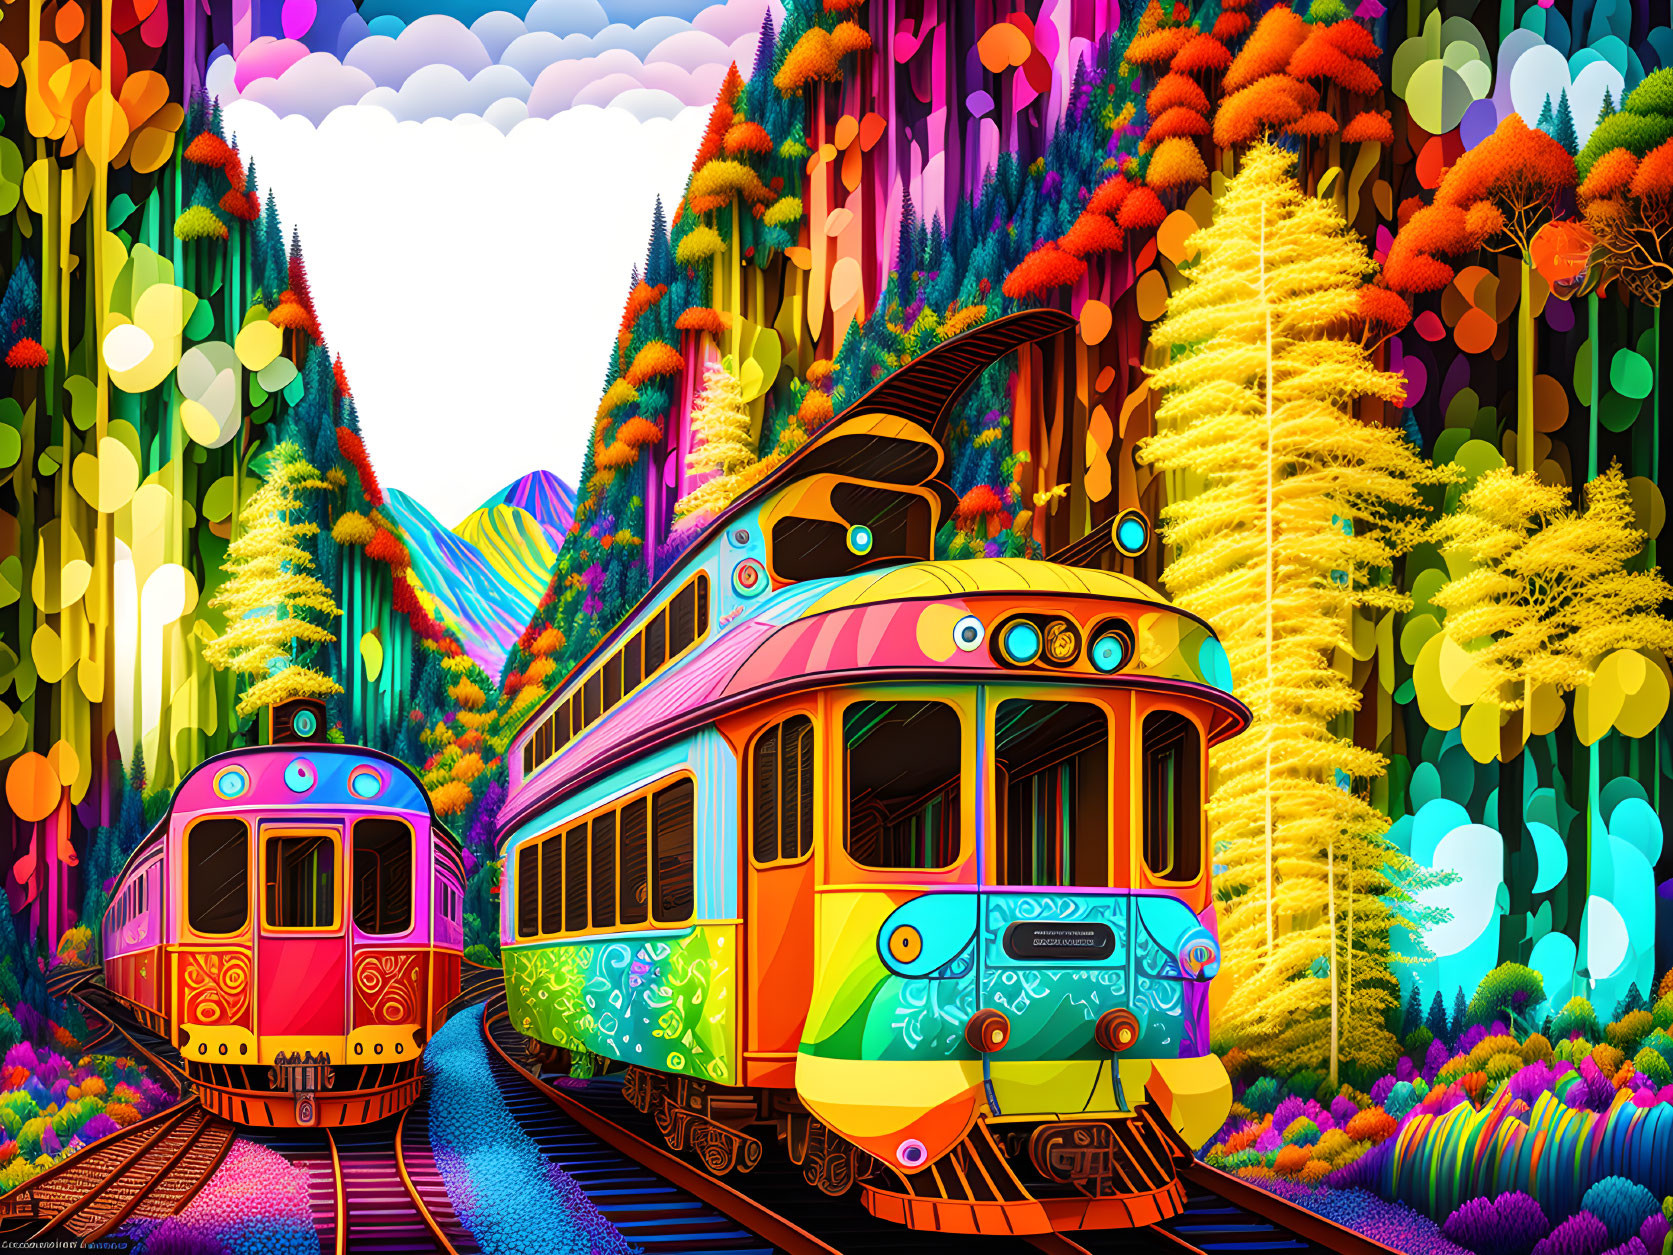 Vibrant illustrated landscape with colorful trains, trees, mountains, and heart-shaped clouds.